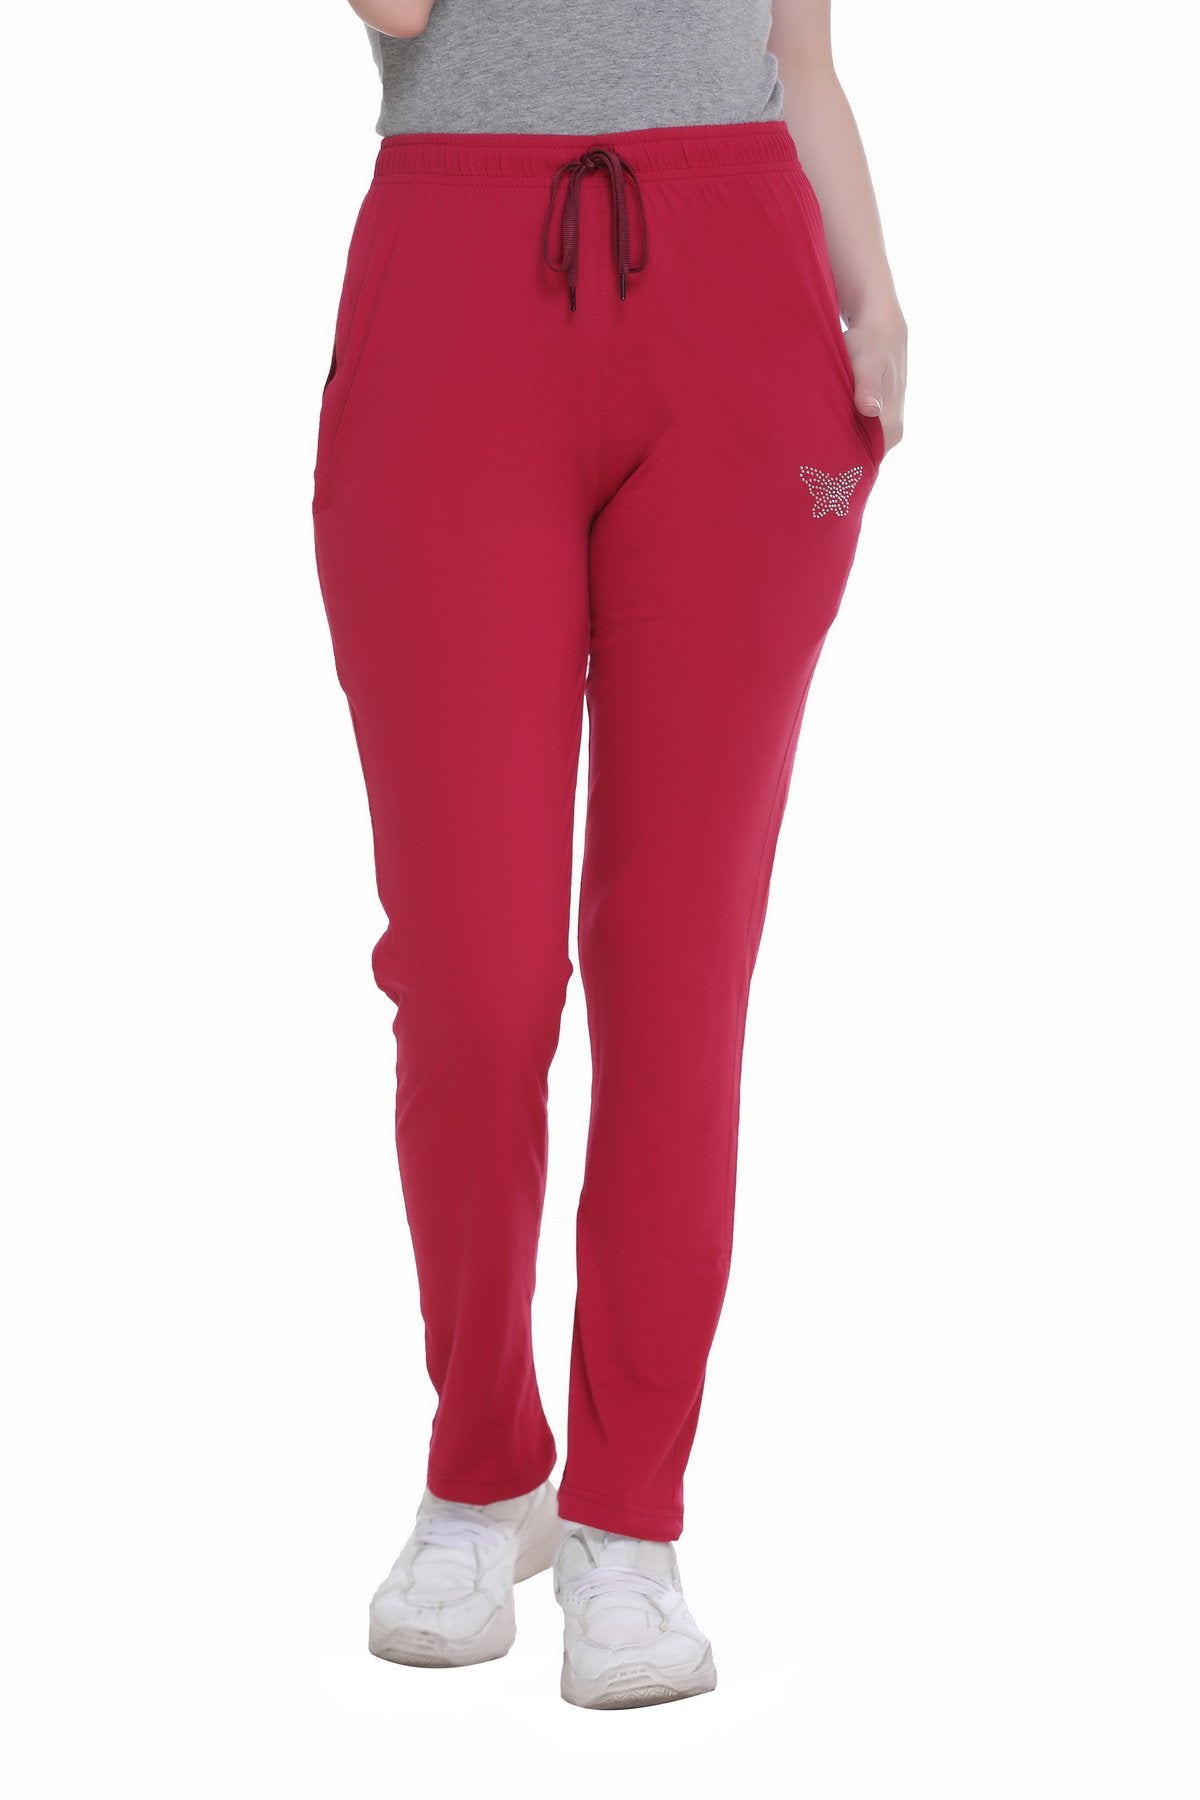 Cotton Track Pants For Women - Maroon